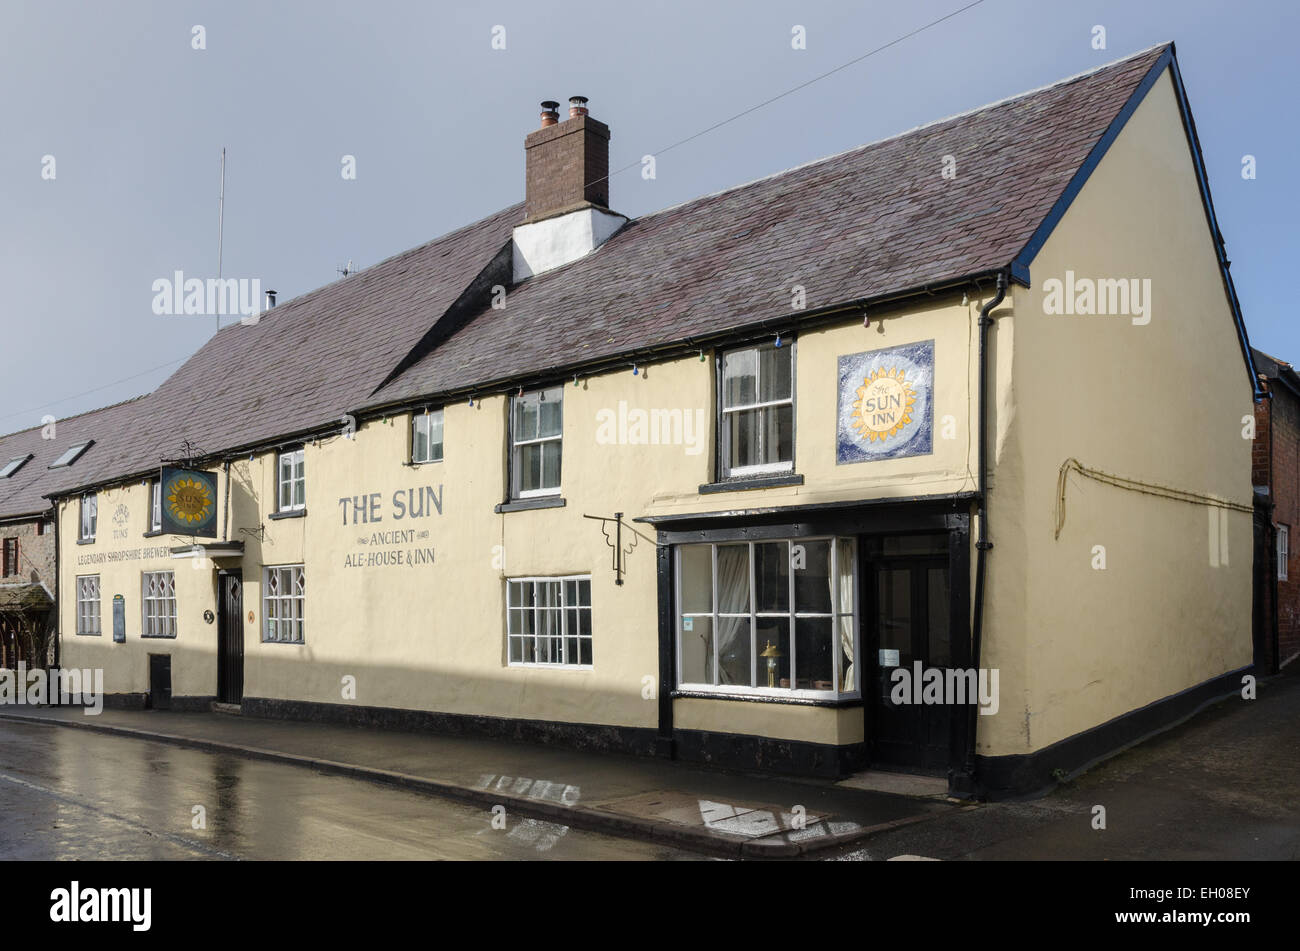 The Sun Ancient Ale House and Inn in the Shropshire town of Clun Stock Photo